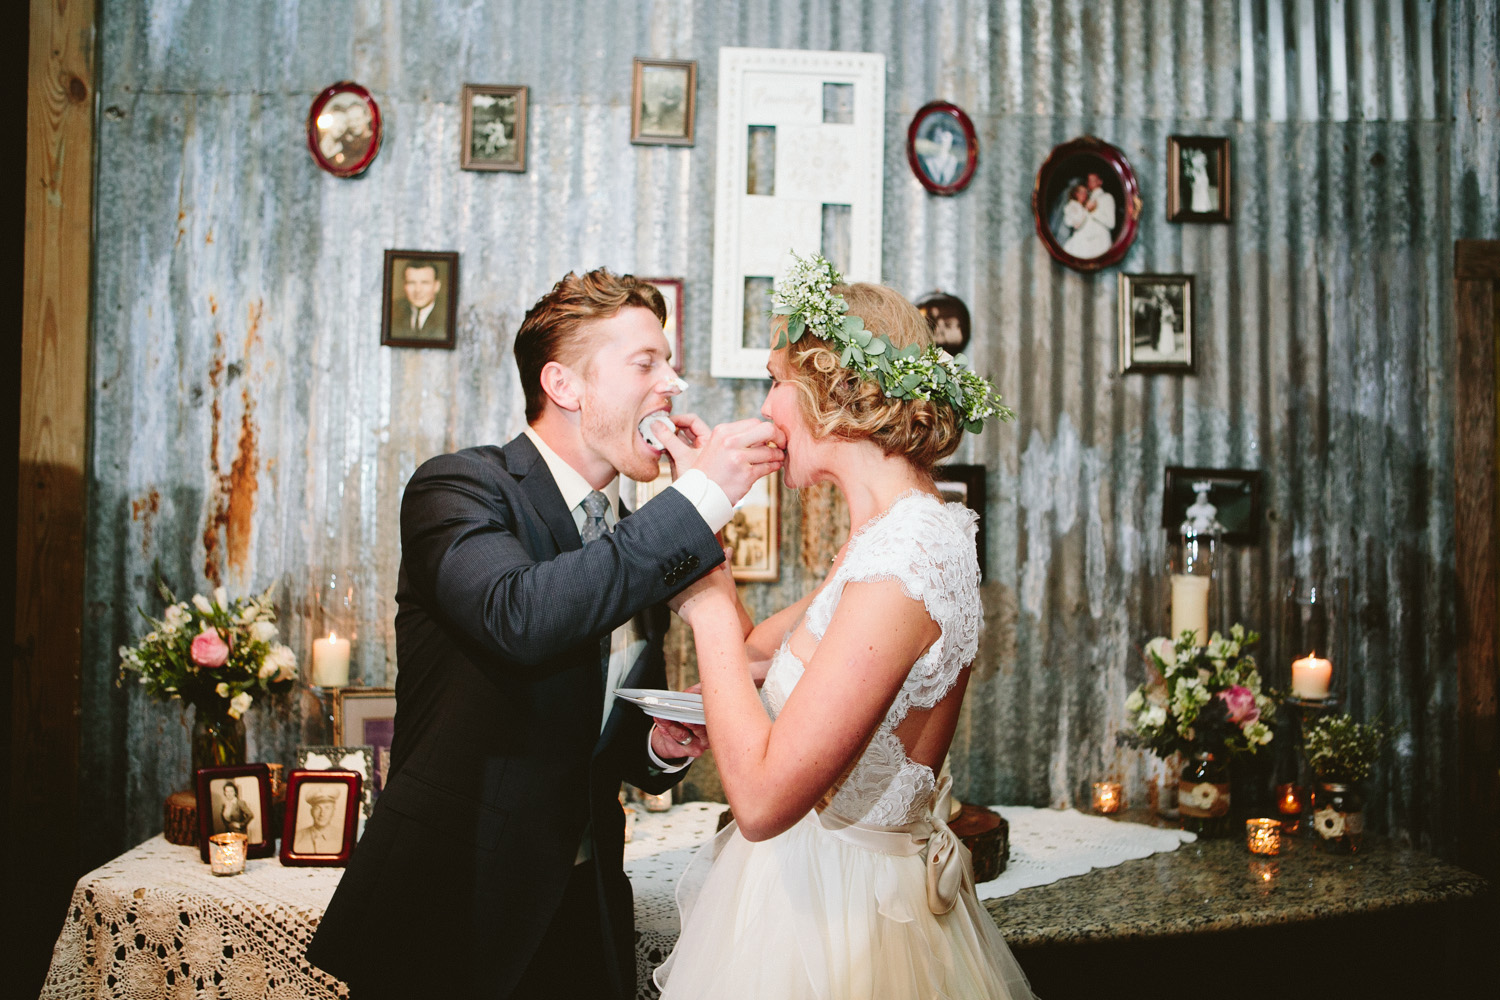 Bride and Groom at Vintage Cake Table | Lisa Woods Photography